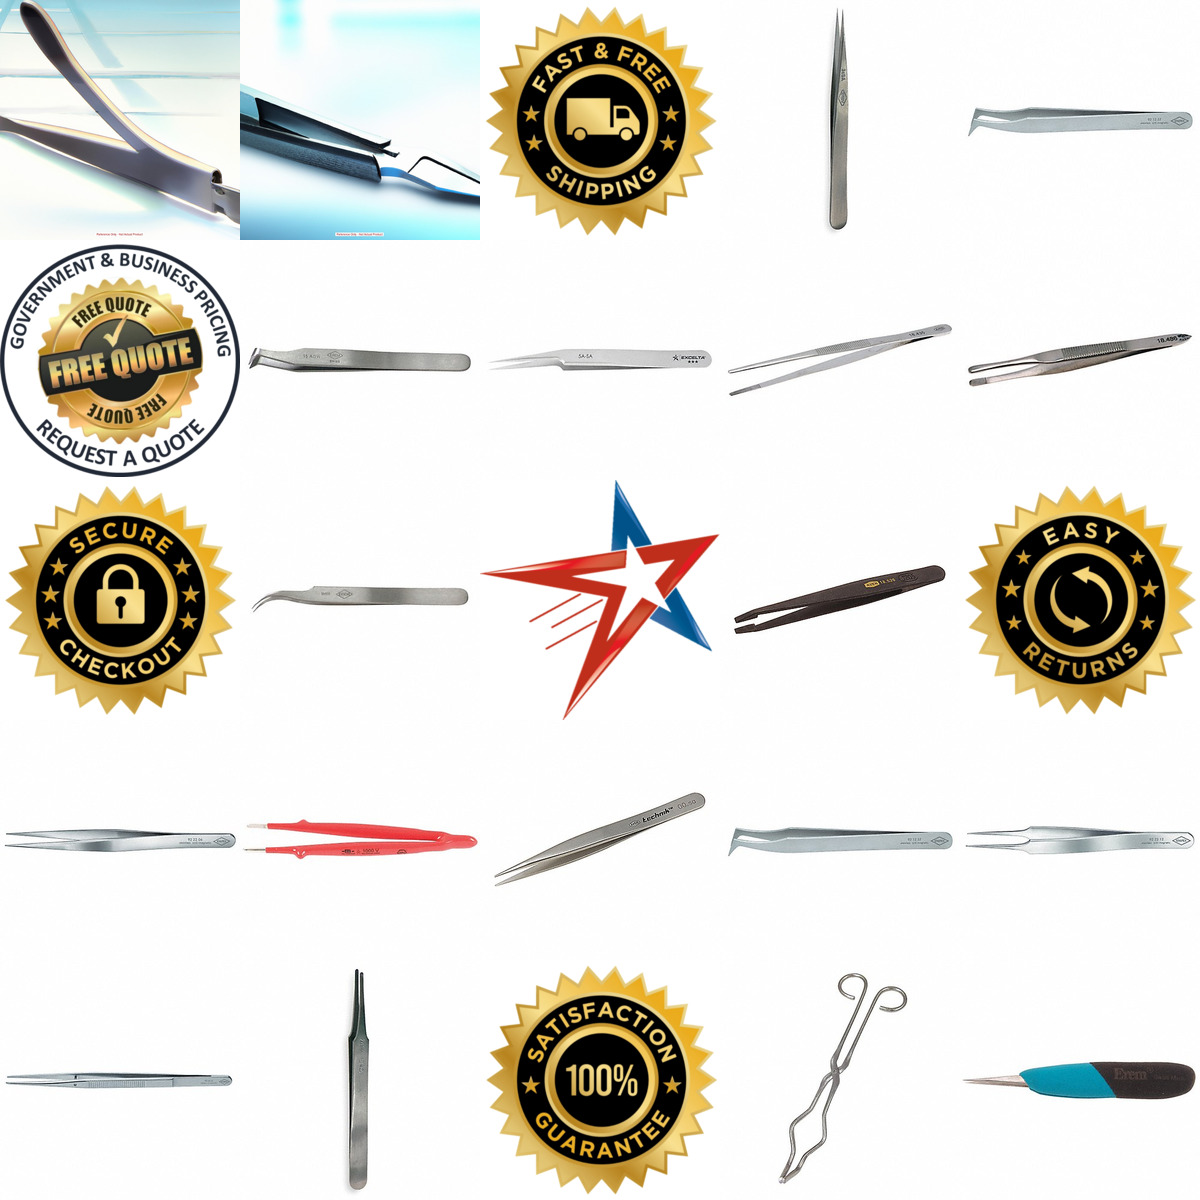 A selection of Tweezers products on GoVets